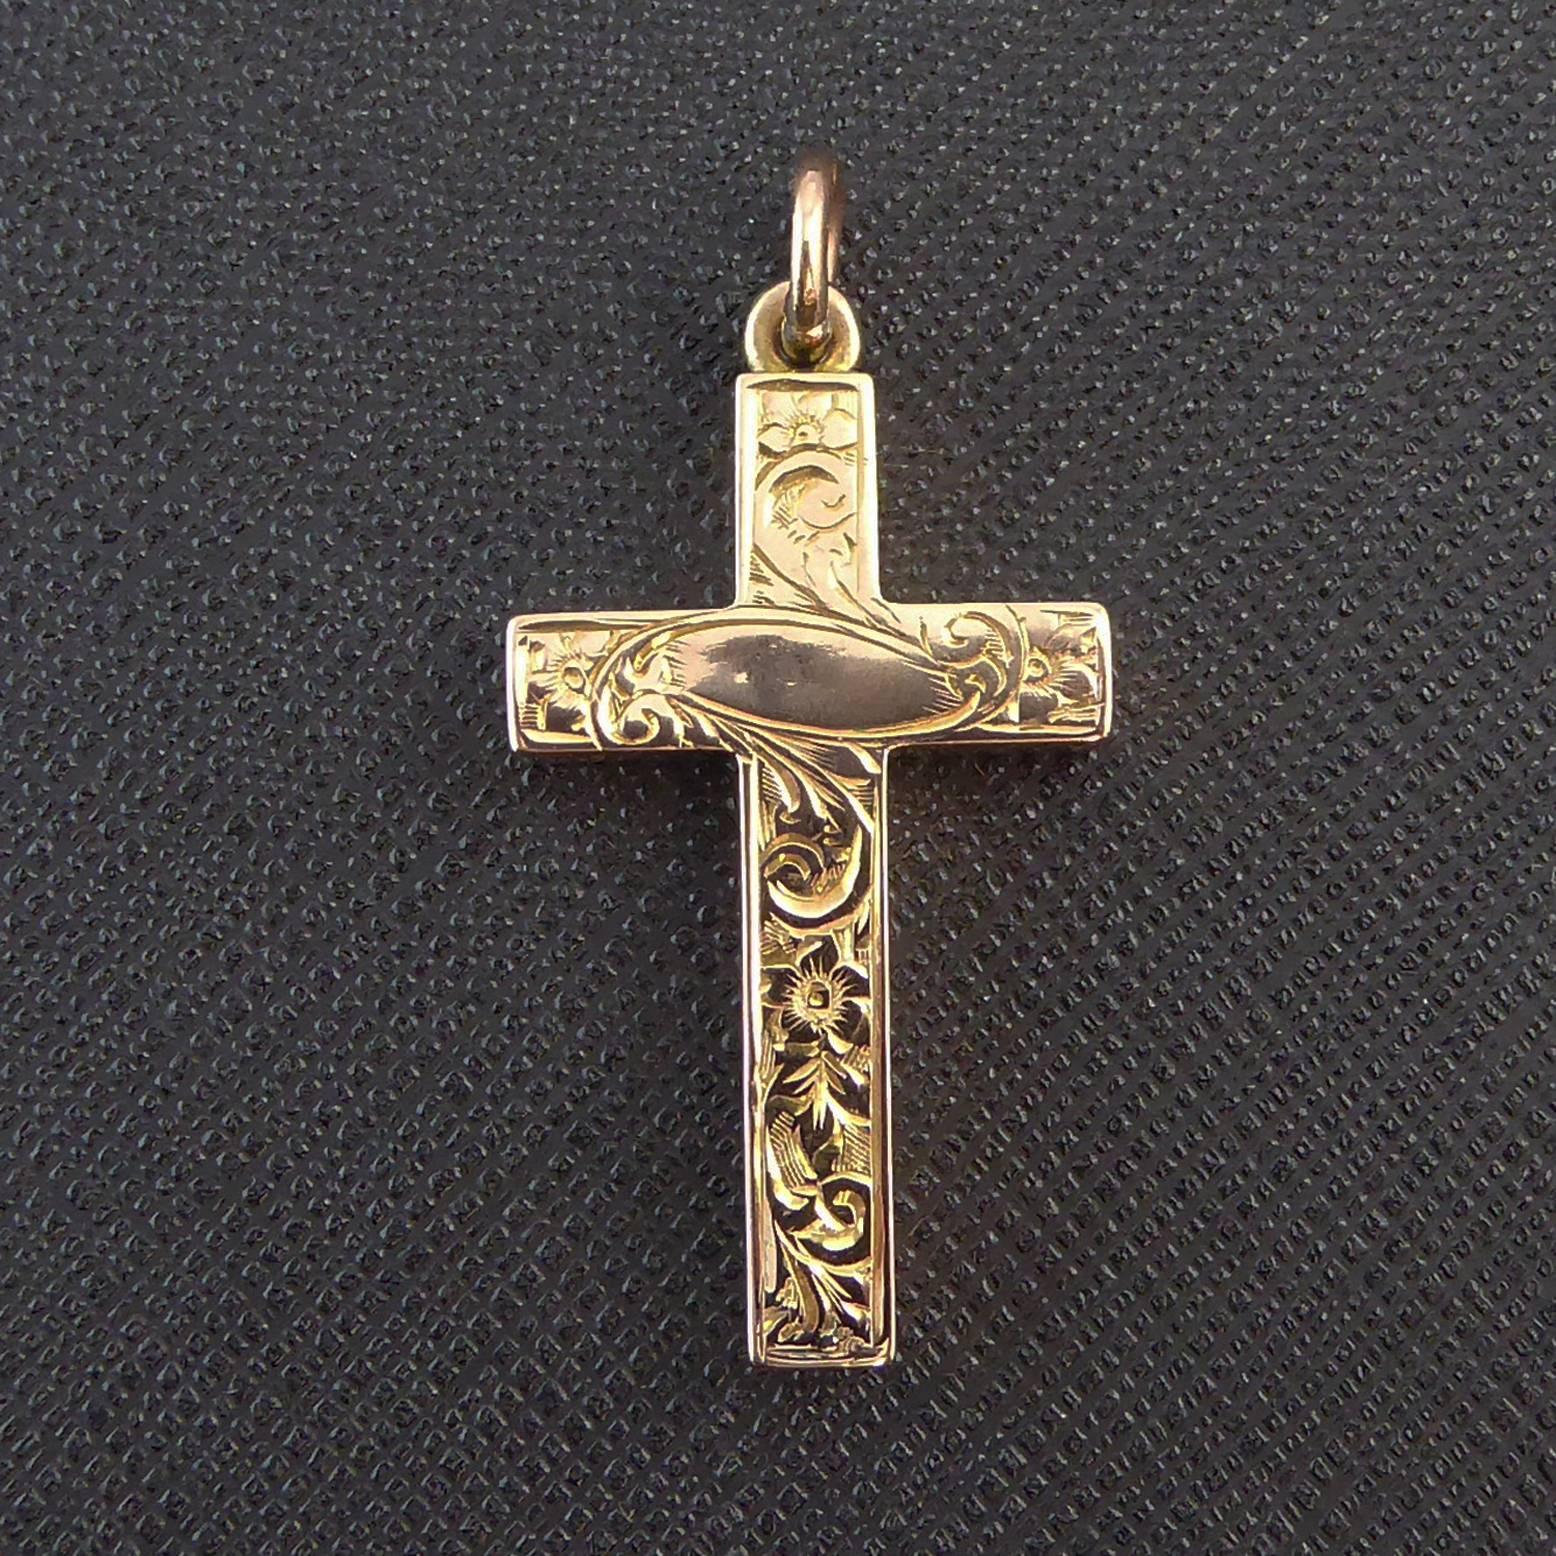 A delightful antique gold cross created in the English Edwardian era of rose gold.  The beautiful and intricate hand engraved pattern has been applied to both sides of the cross and each side also has a plain polished cartouche.  The cross is a